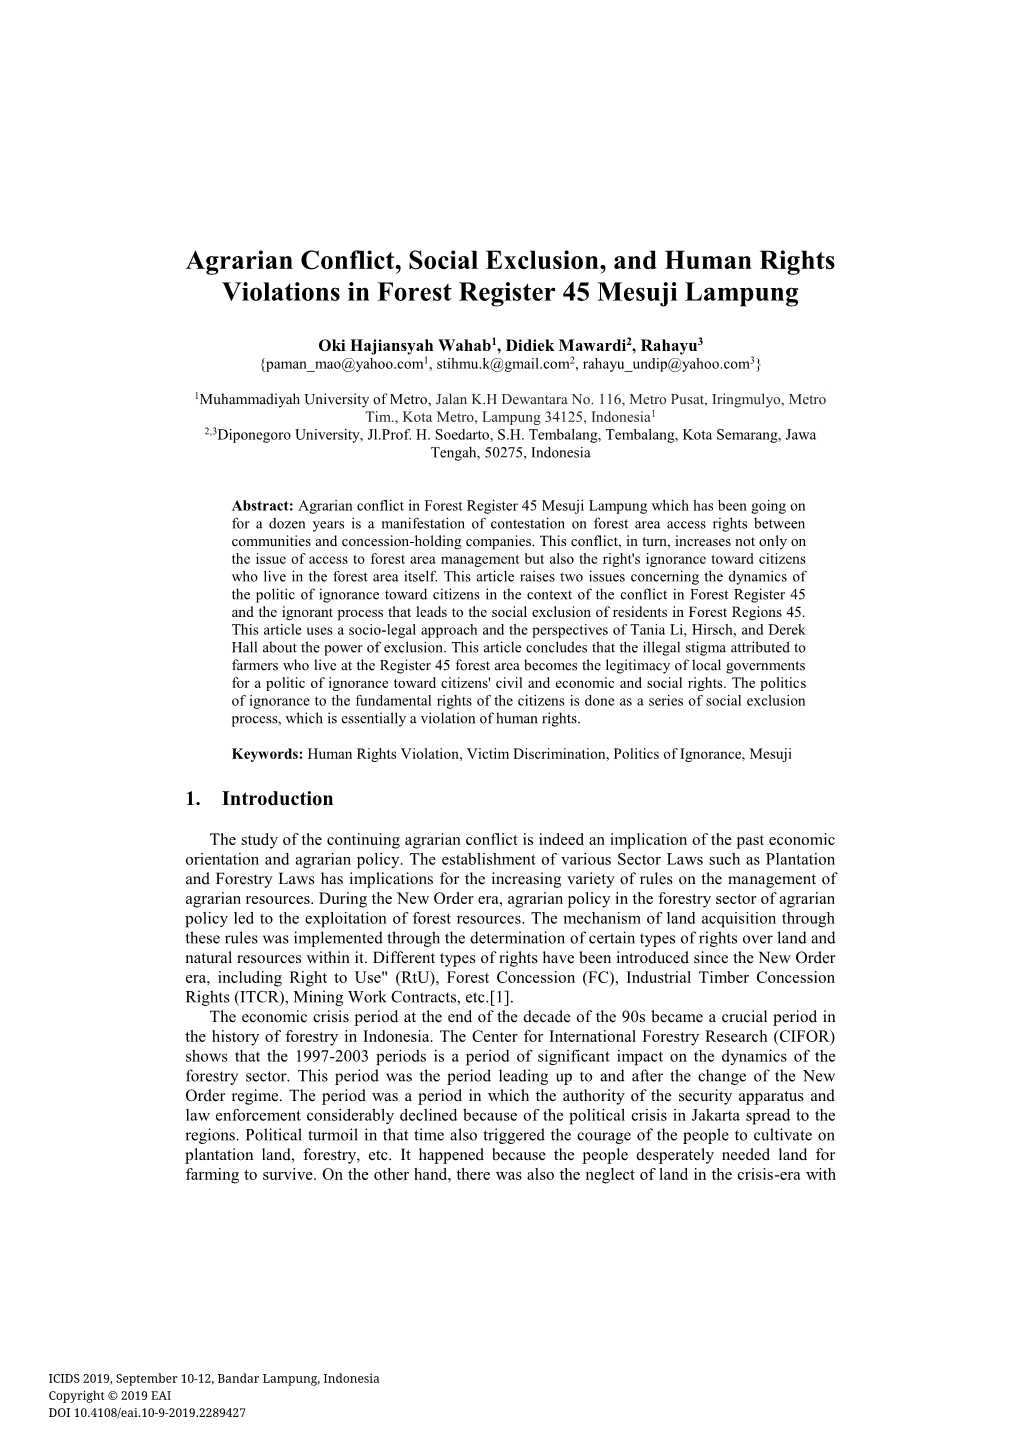 Agrarian Conflict, Social Exclusion, and Human Rights Violations in Forest Register 45 Mesuji Lampung